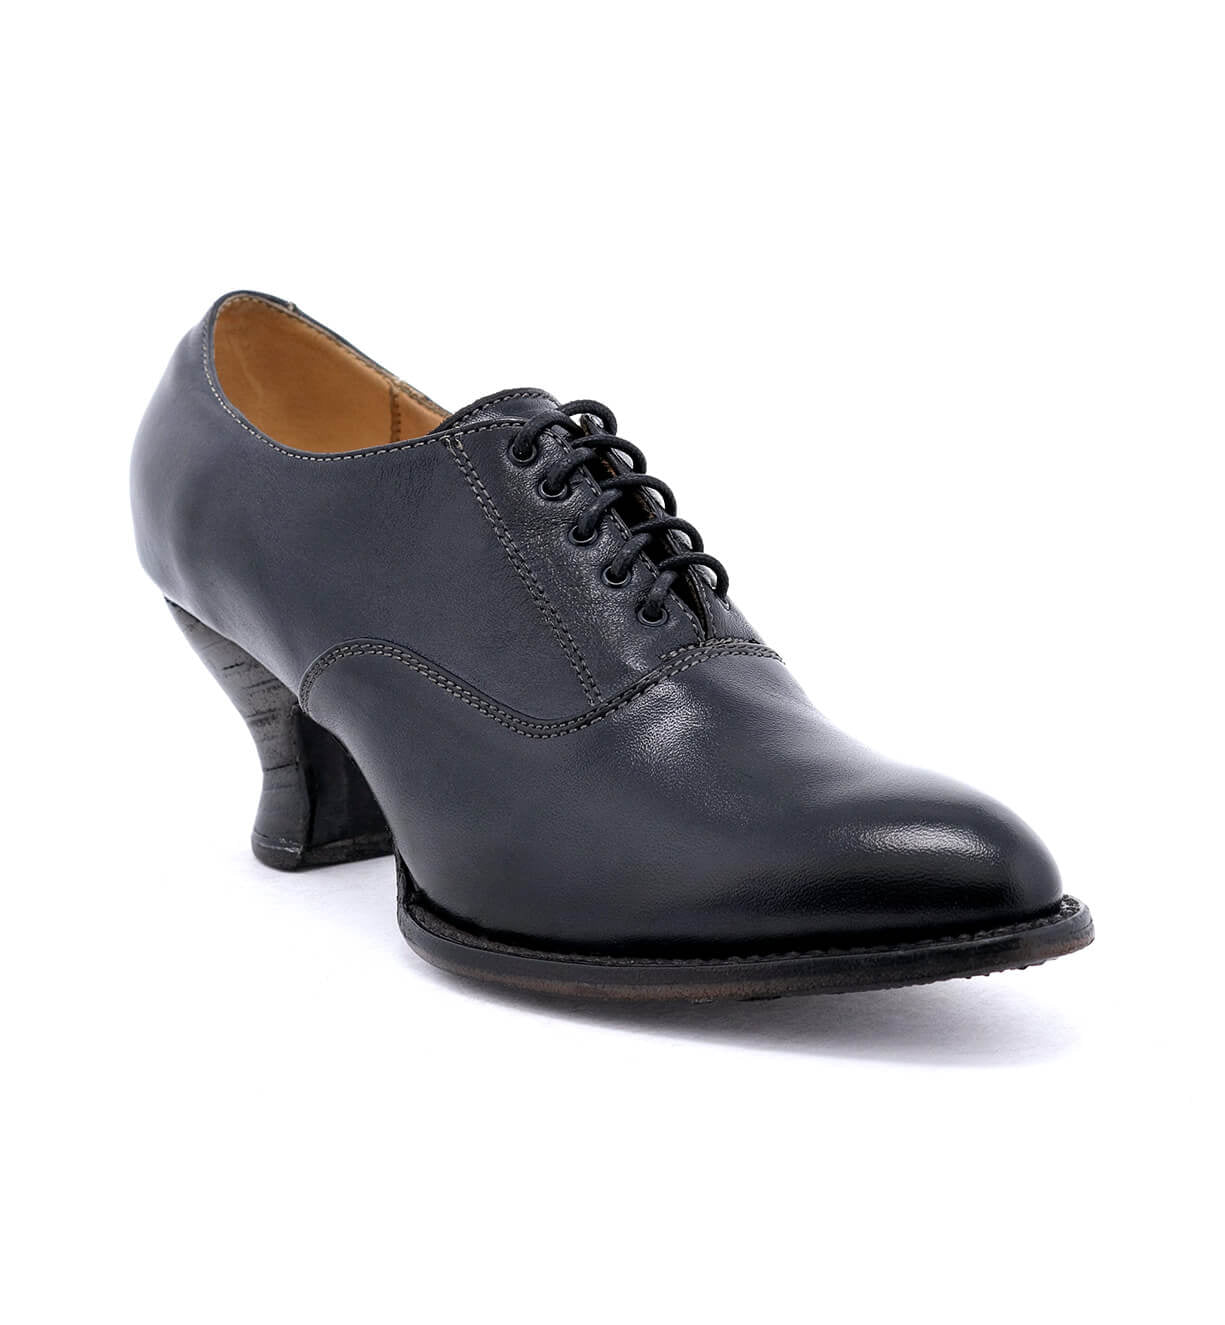 A women's black leather Janet oxford shoe with a spooled heel, lace up, on a white background, by Oak Tree Farms.